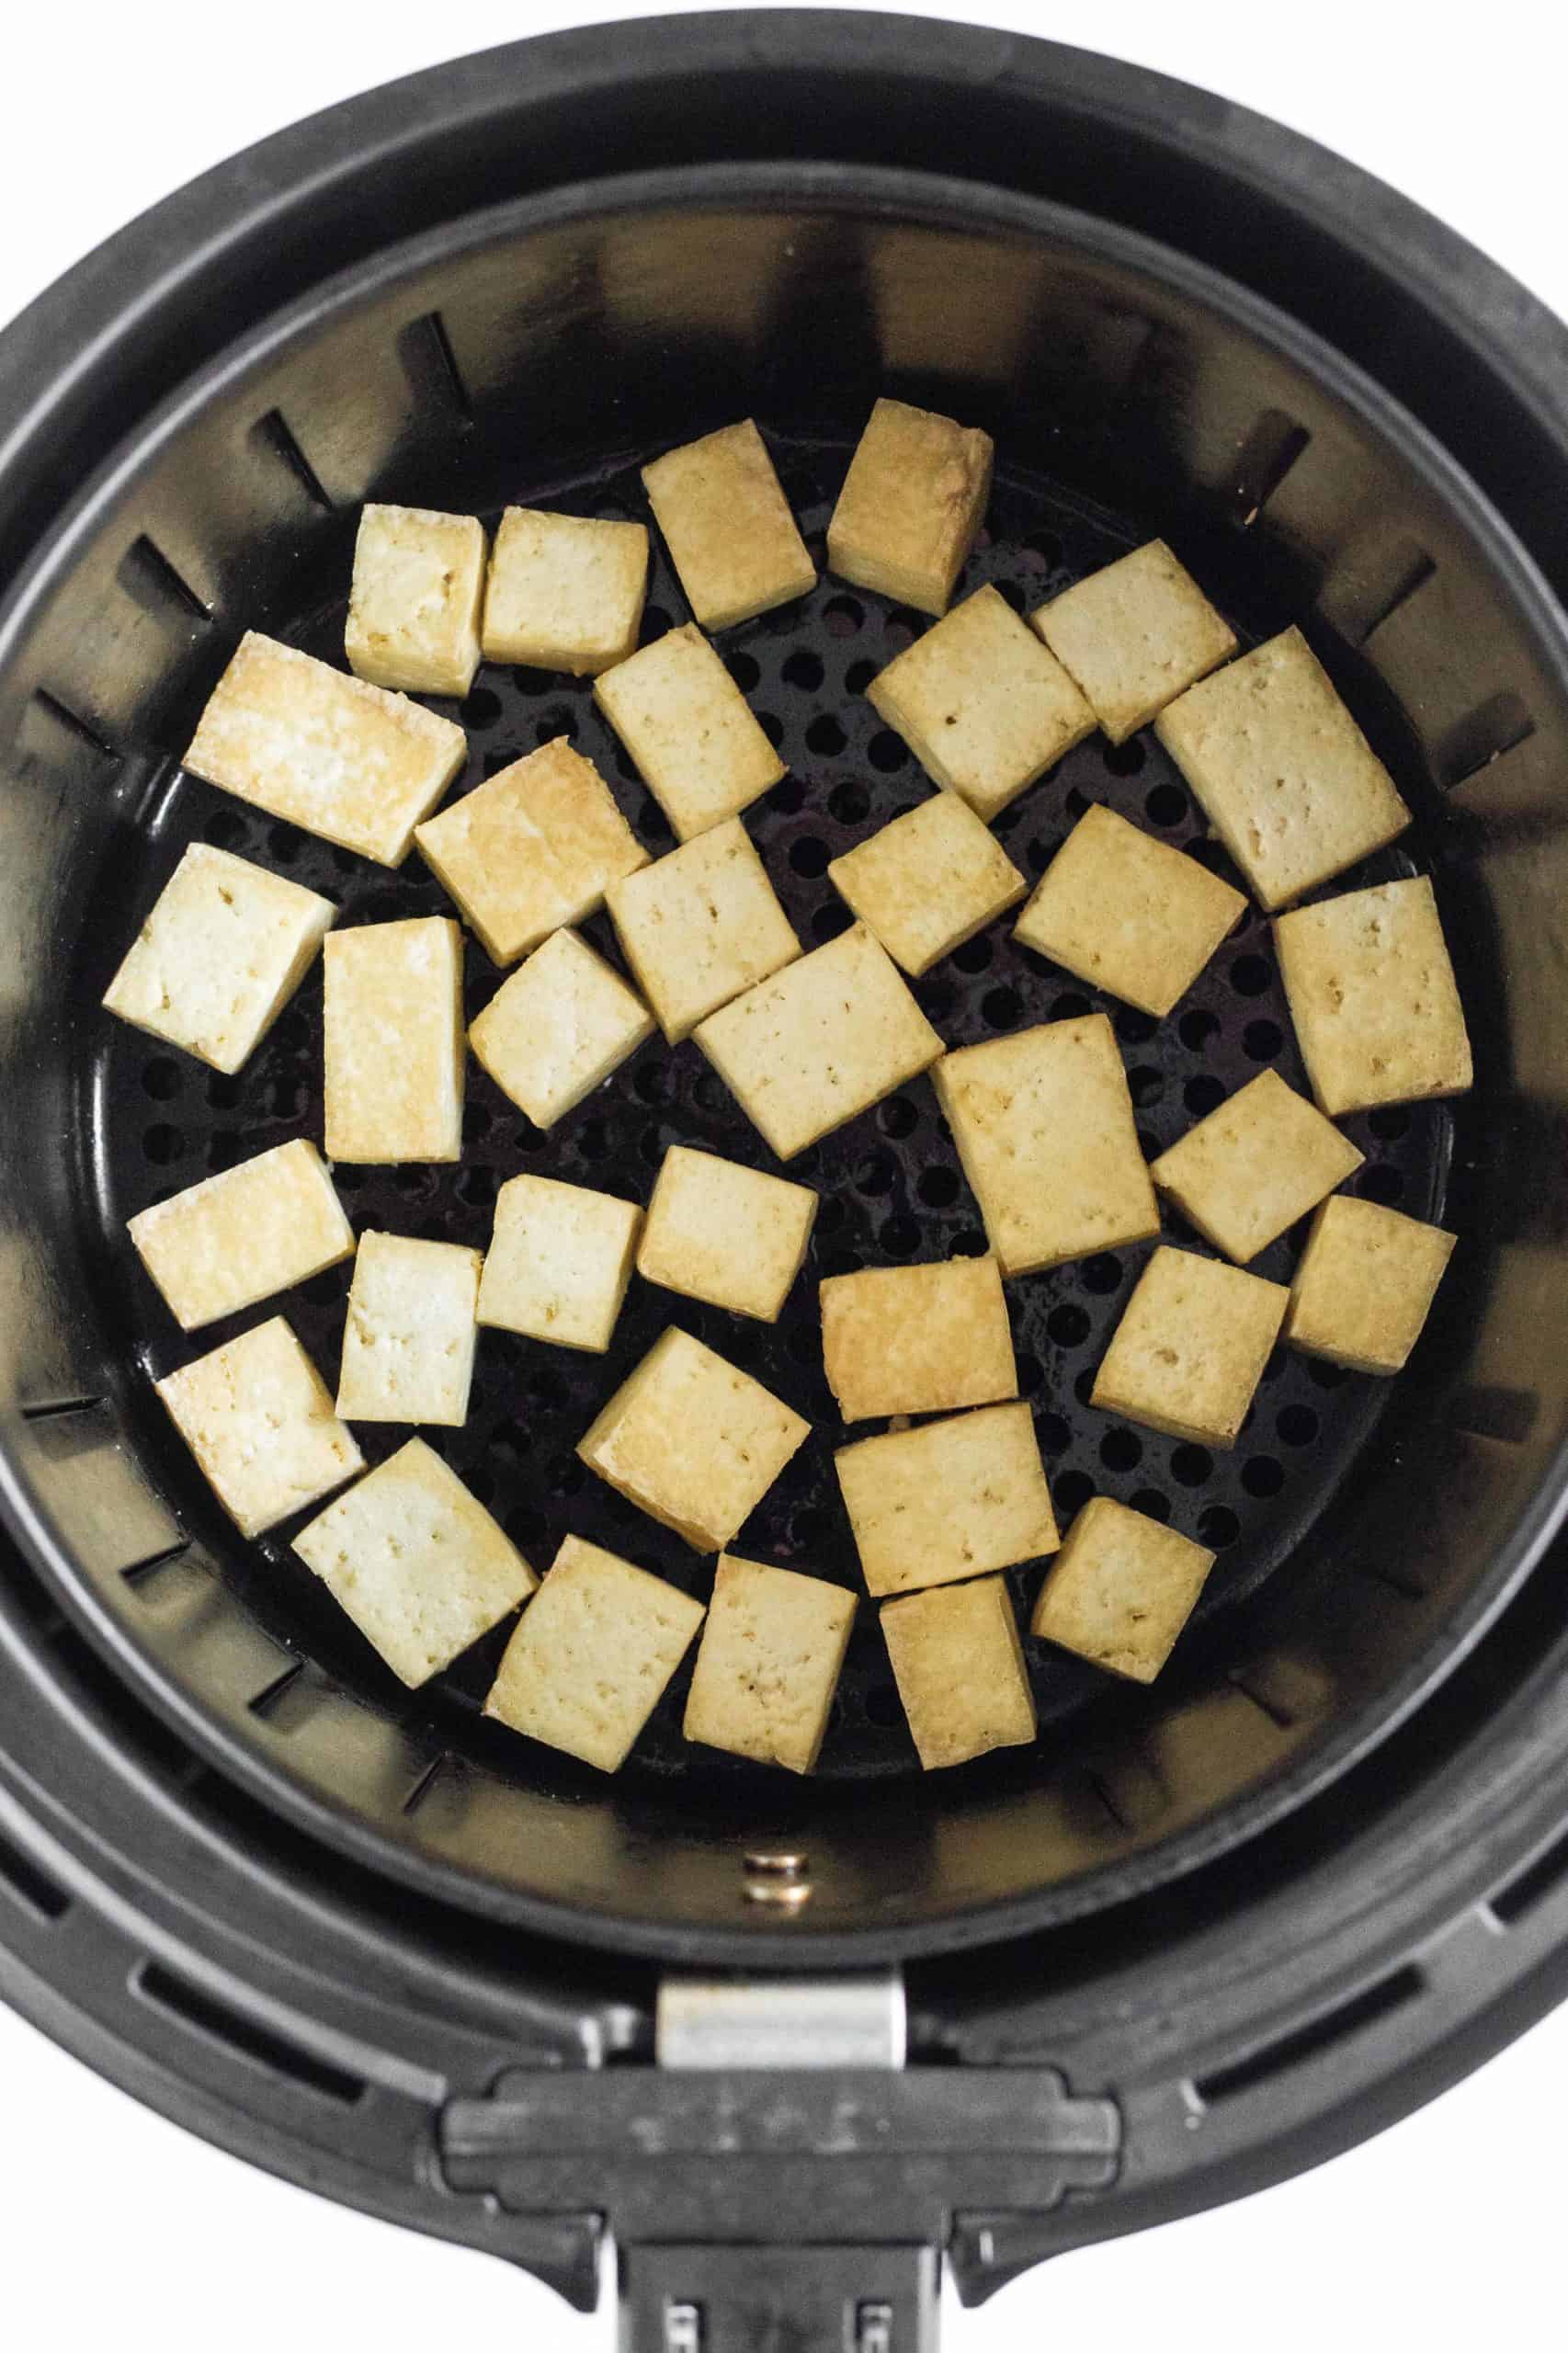 Lightly golden tofu cubes in the air fryer basket.